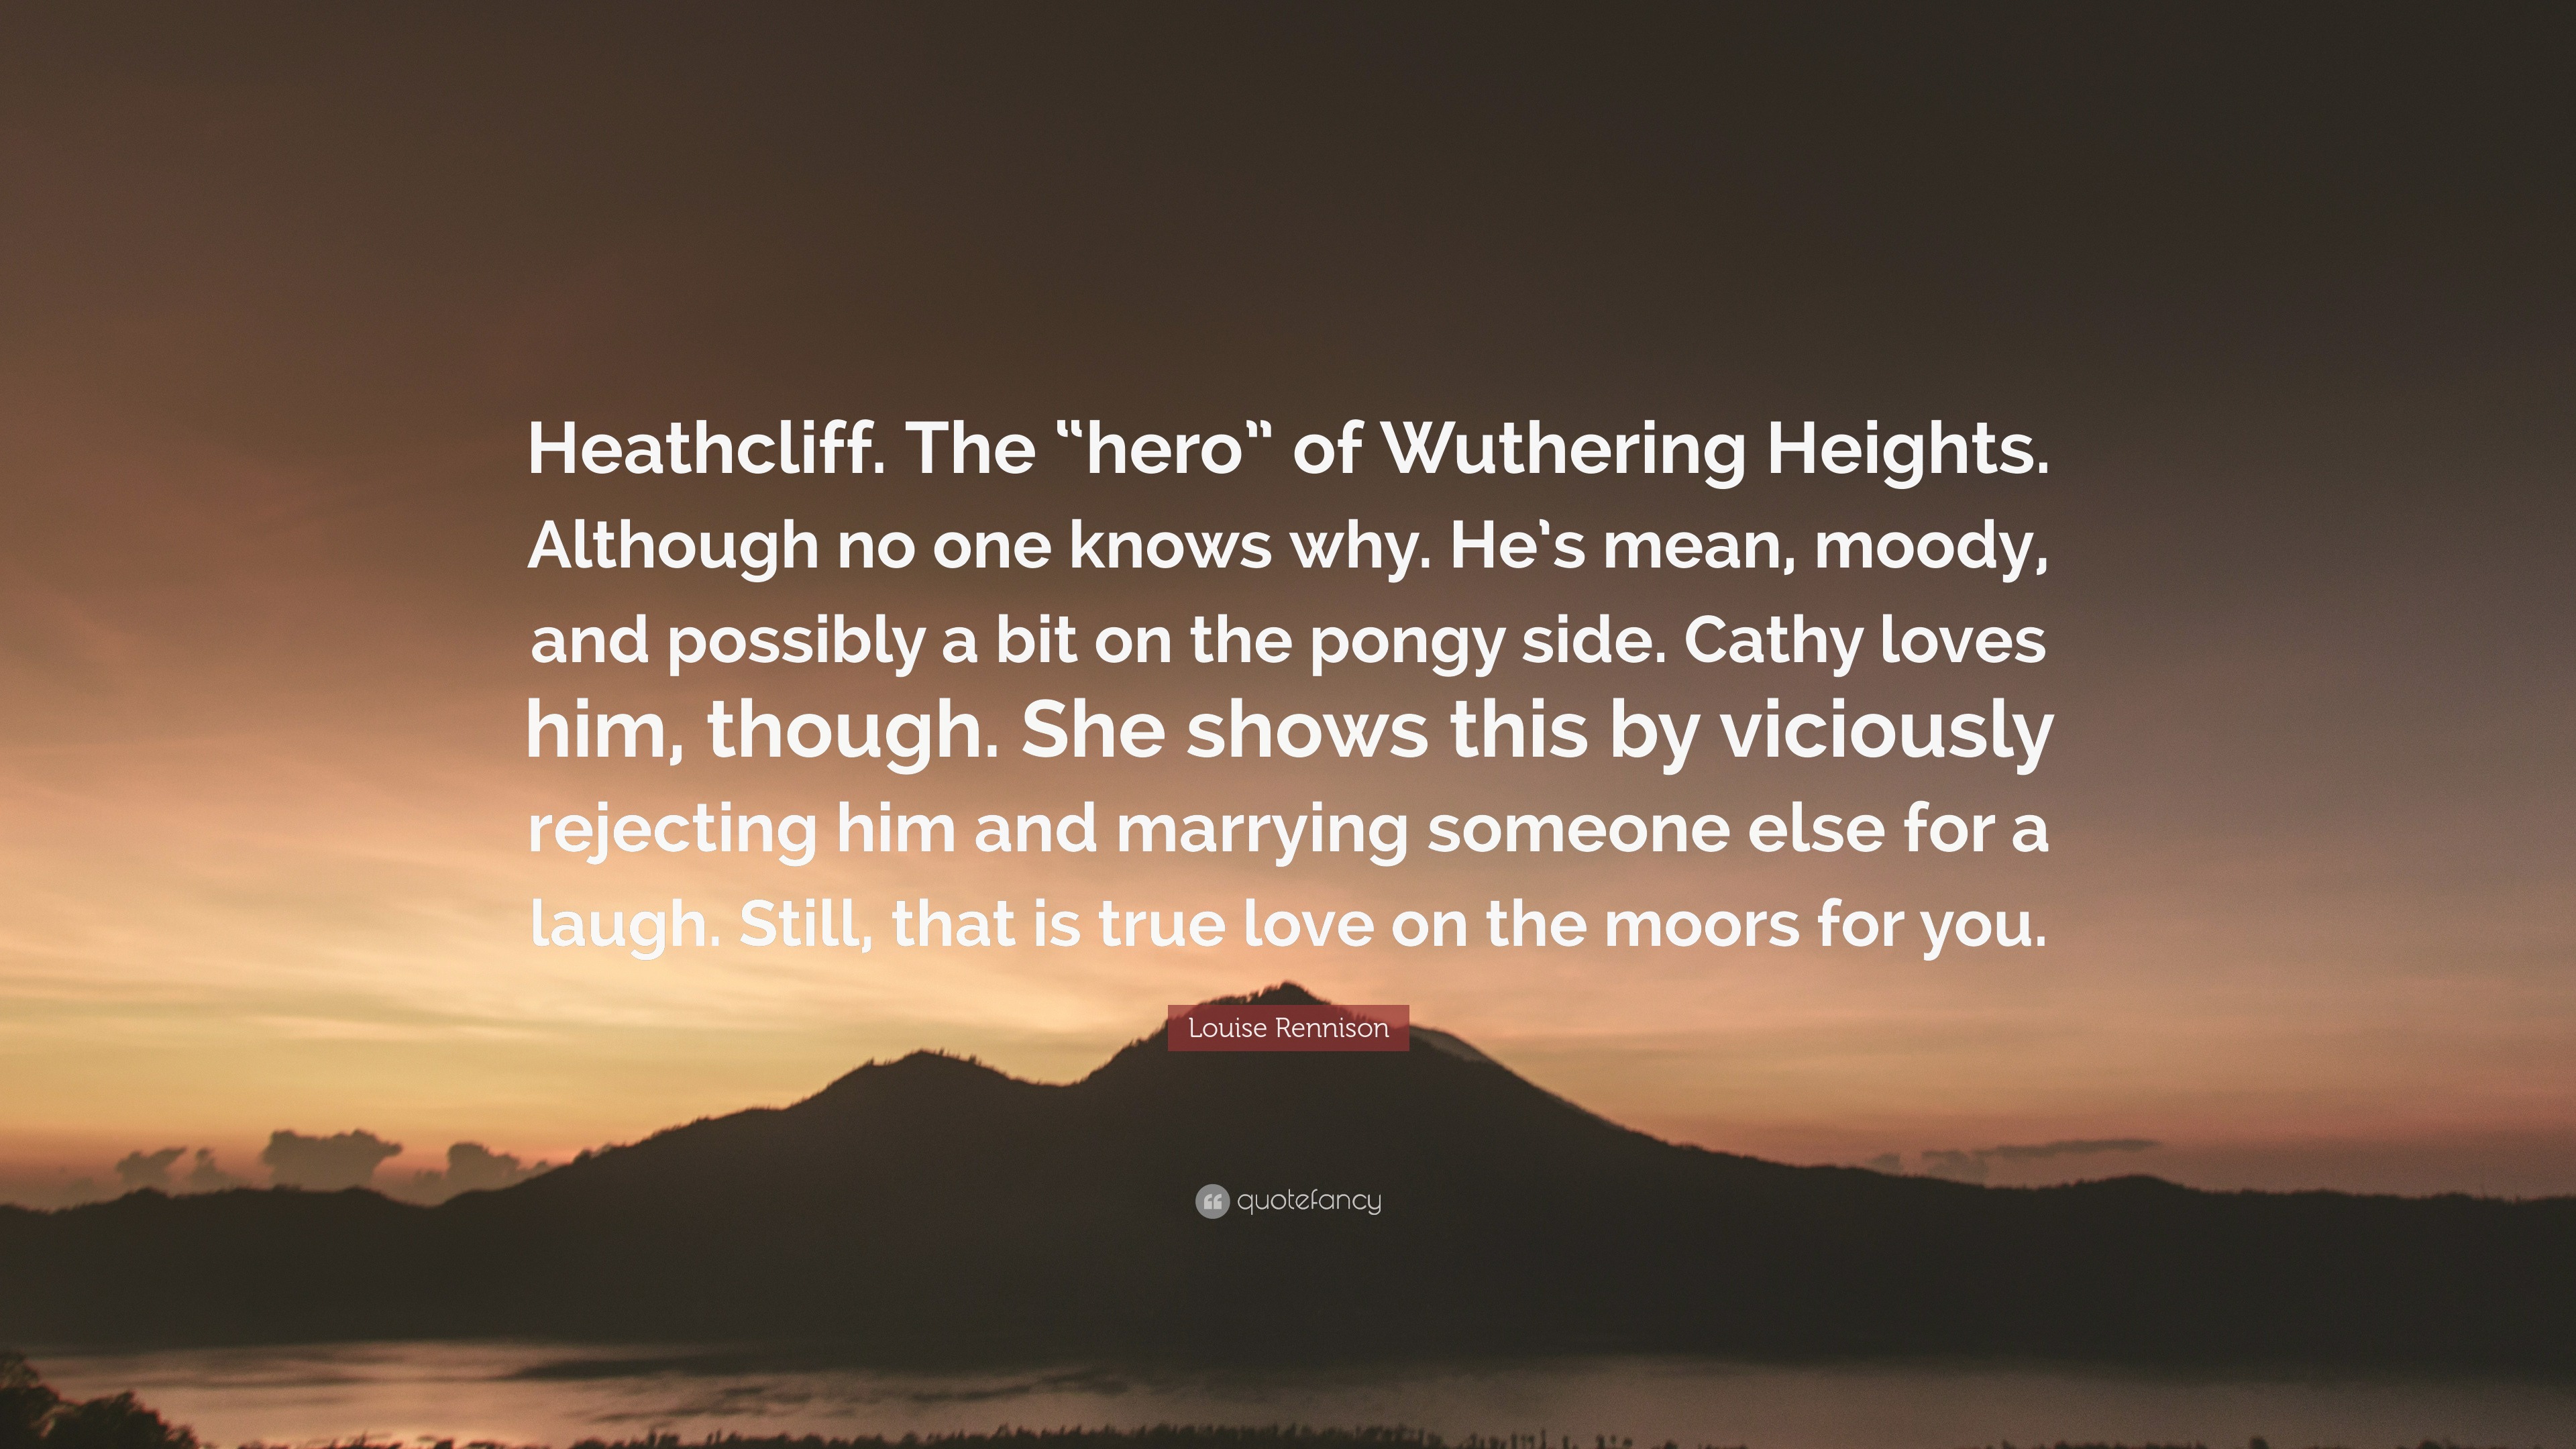 Louise Rennison Quote “Heathcliff The “hero” of Wuthering Heights Although